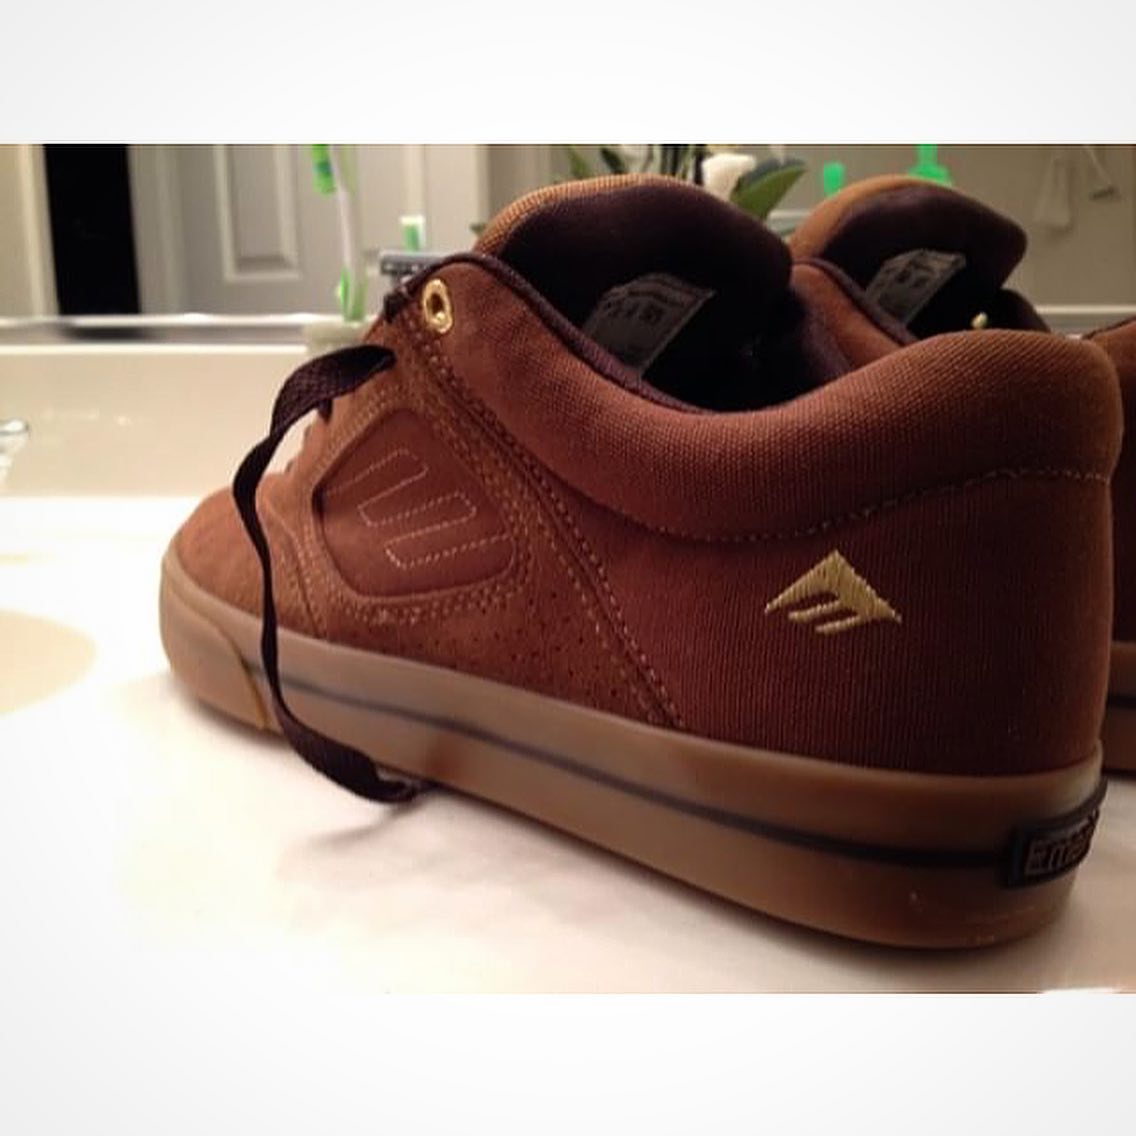 @thineprinceali is selling some 10.5 crispy Reynolds 3s.  Get it while you can!  #sk8shoewars #emerica